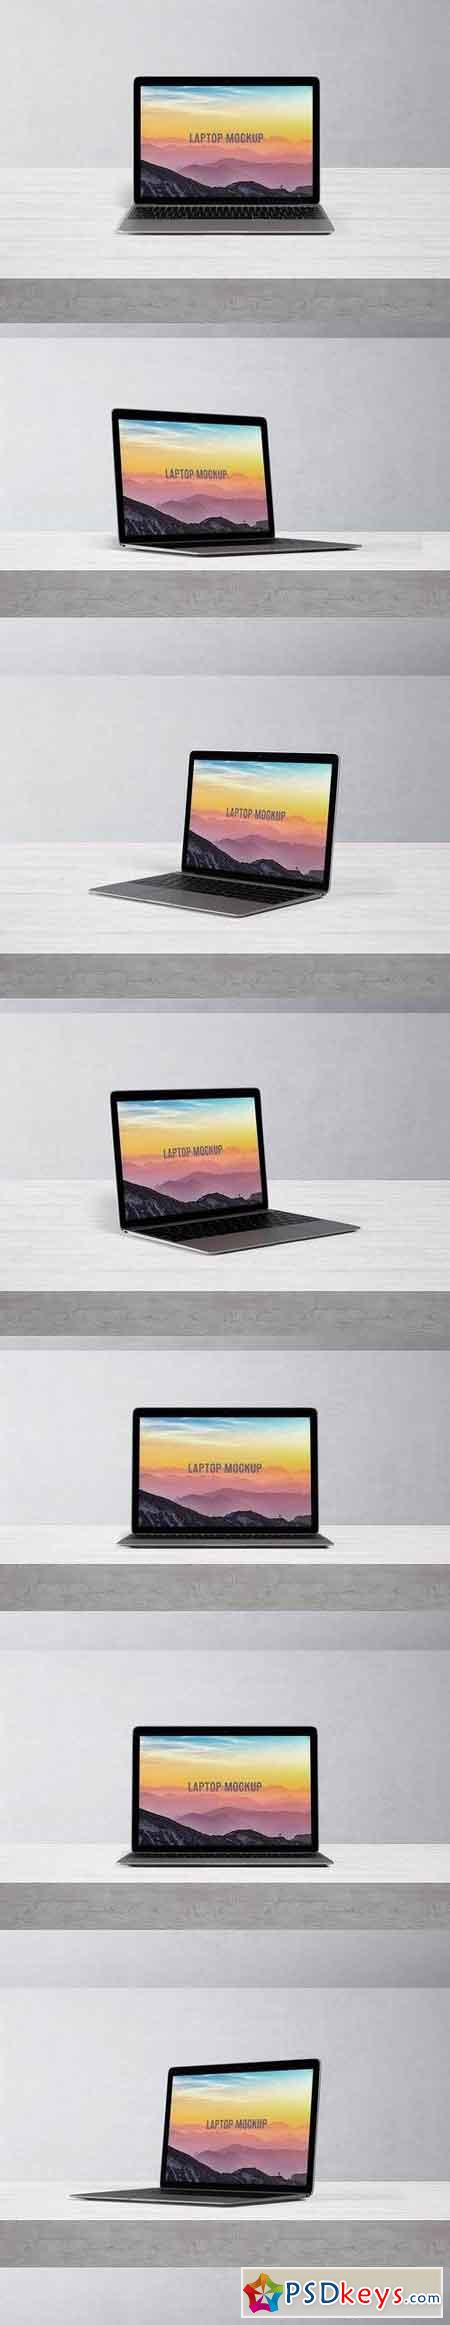 14x9 Laptop Screen Mock-Up - Space Gray